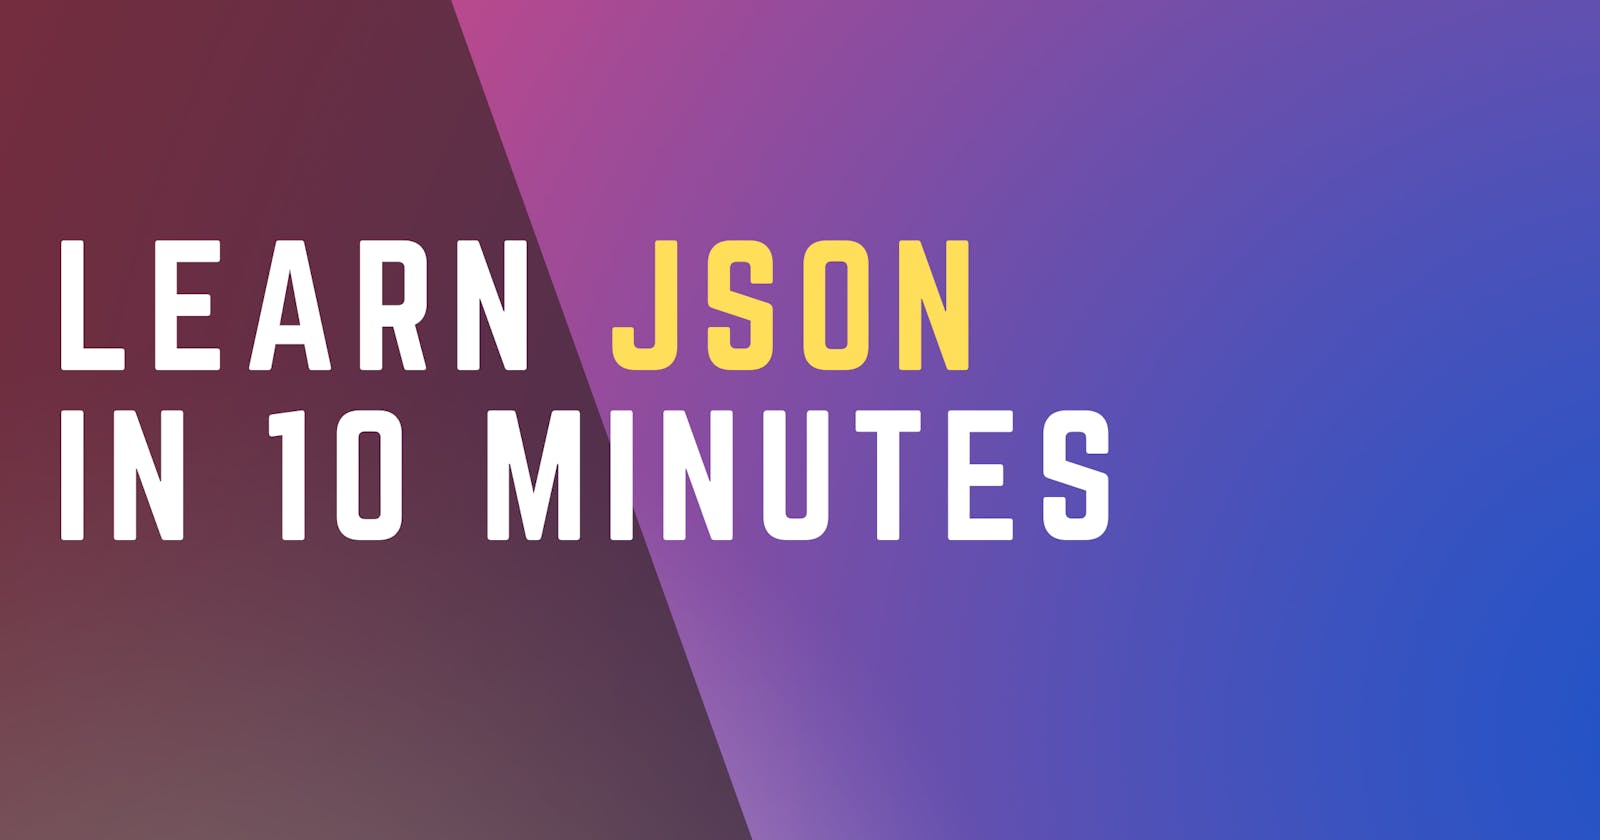 Learn JSON in 10 minutes